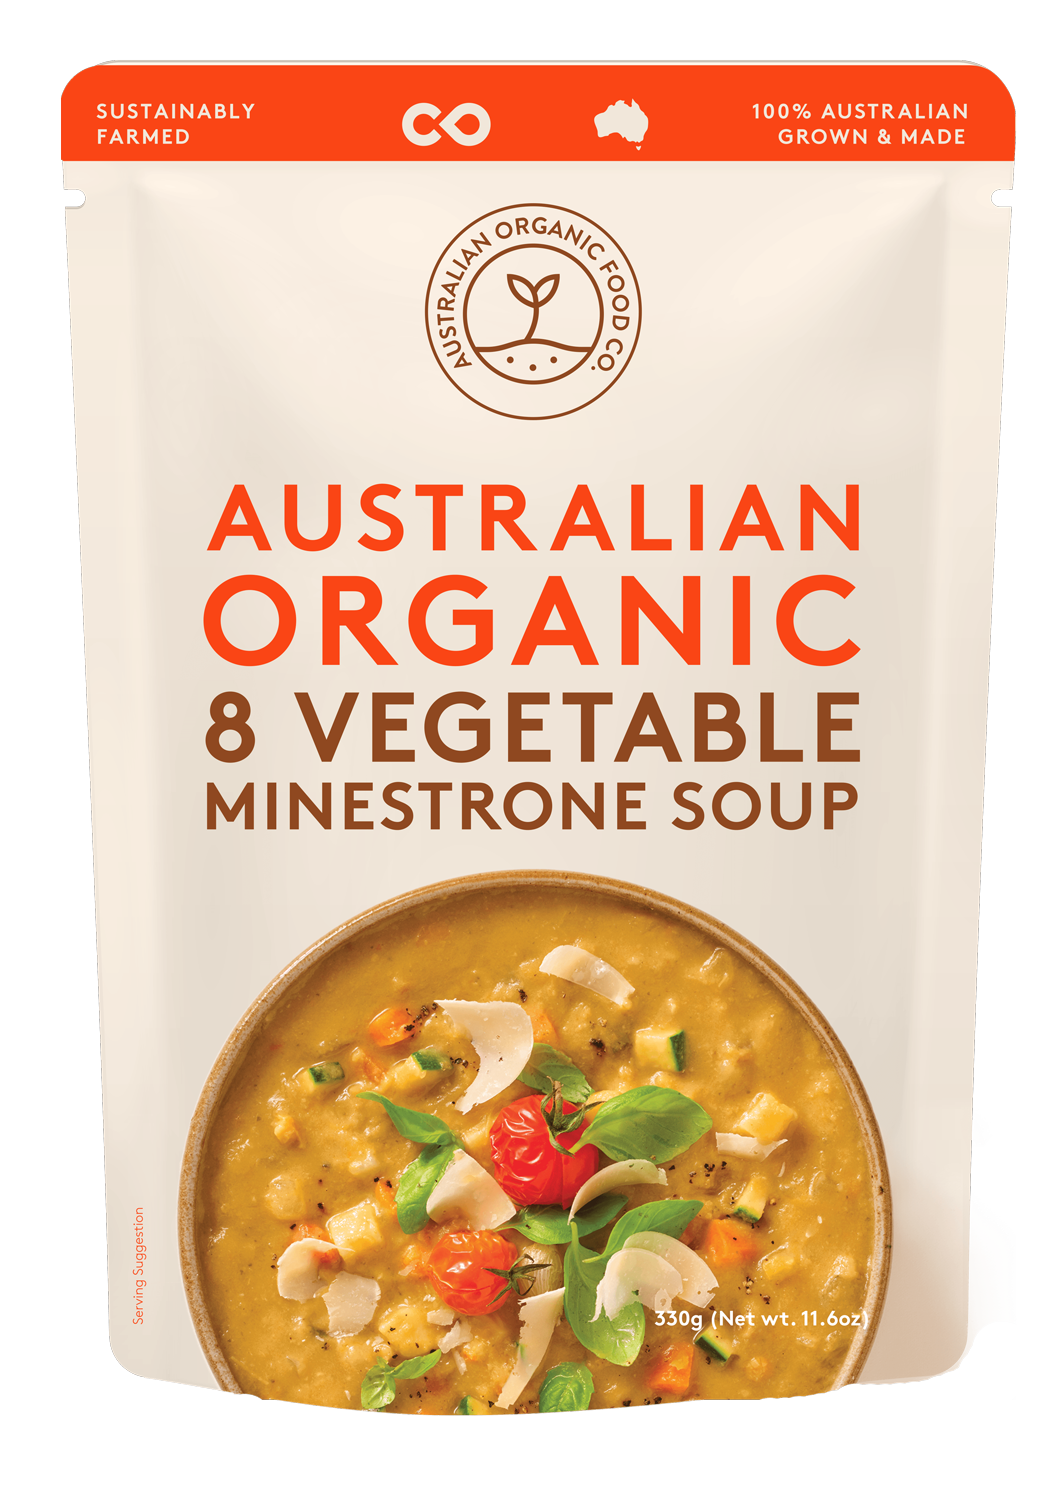 8 Vegetable Minestrone Soup